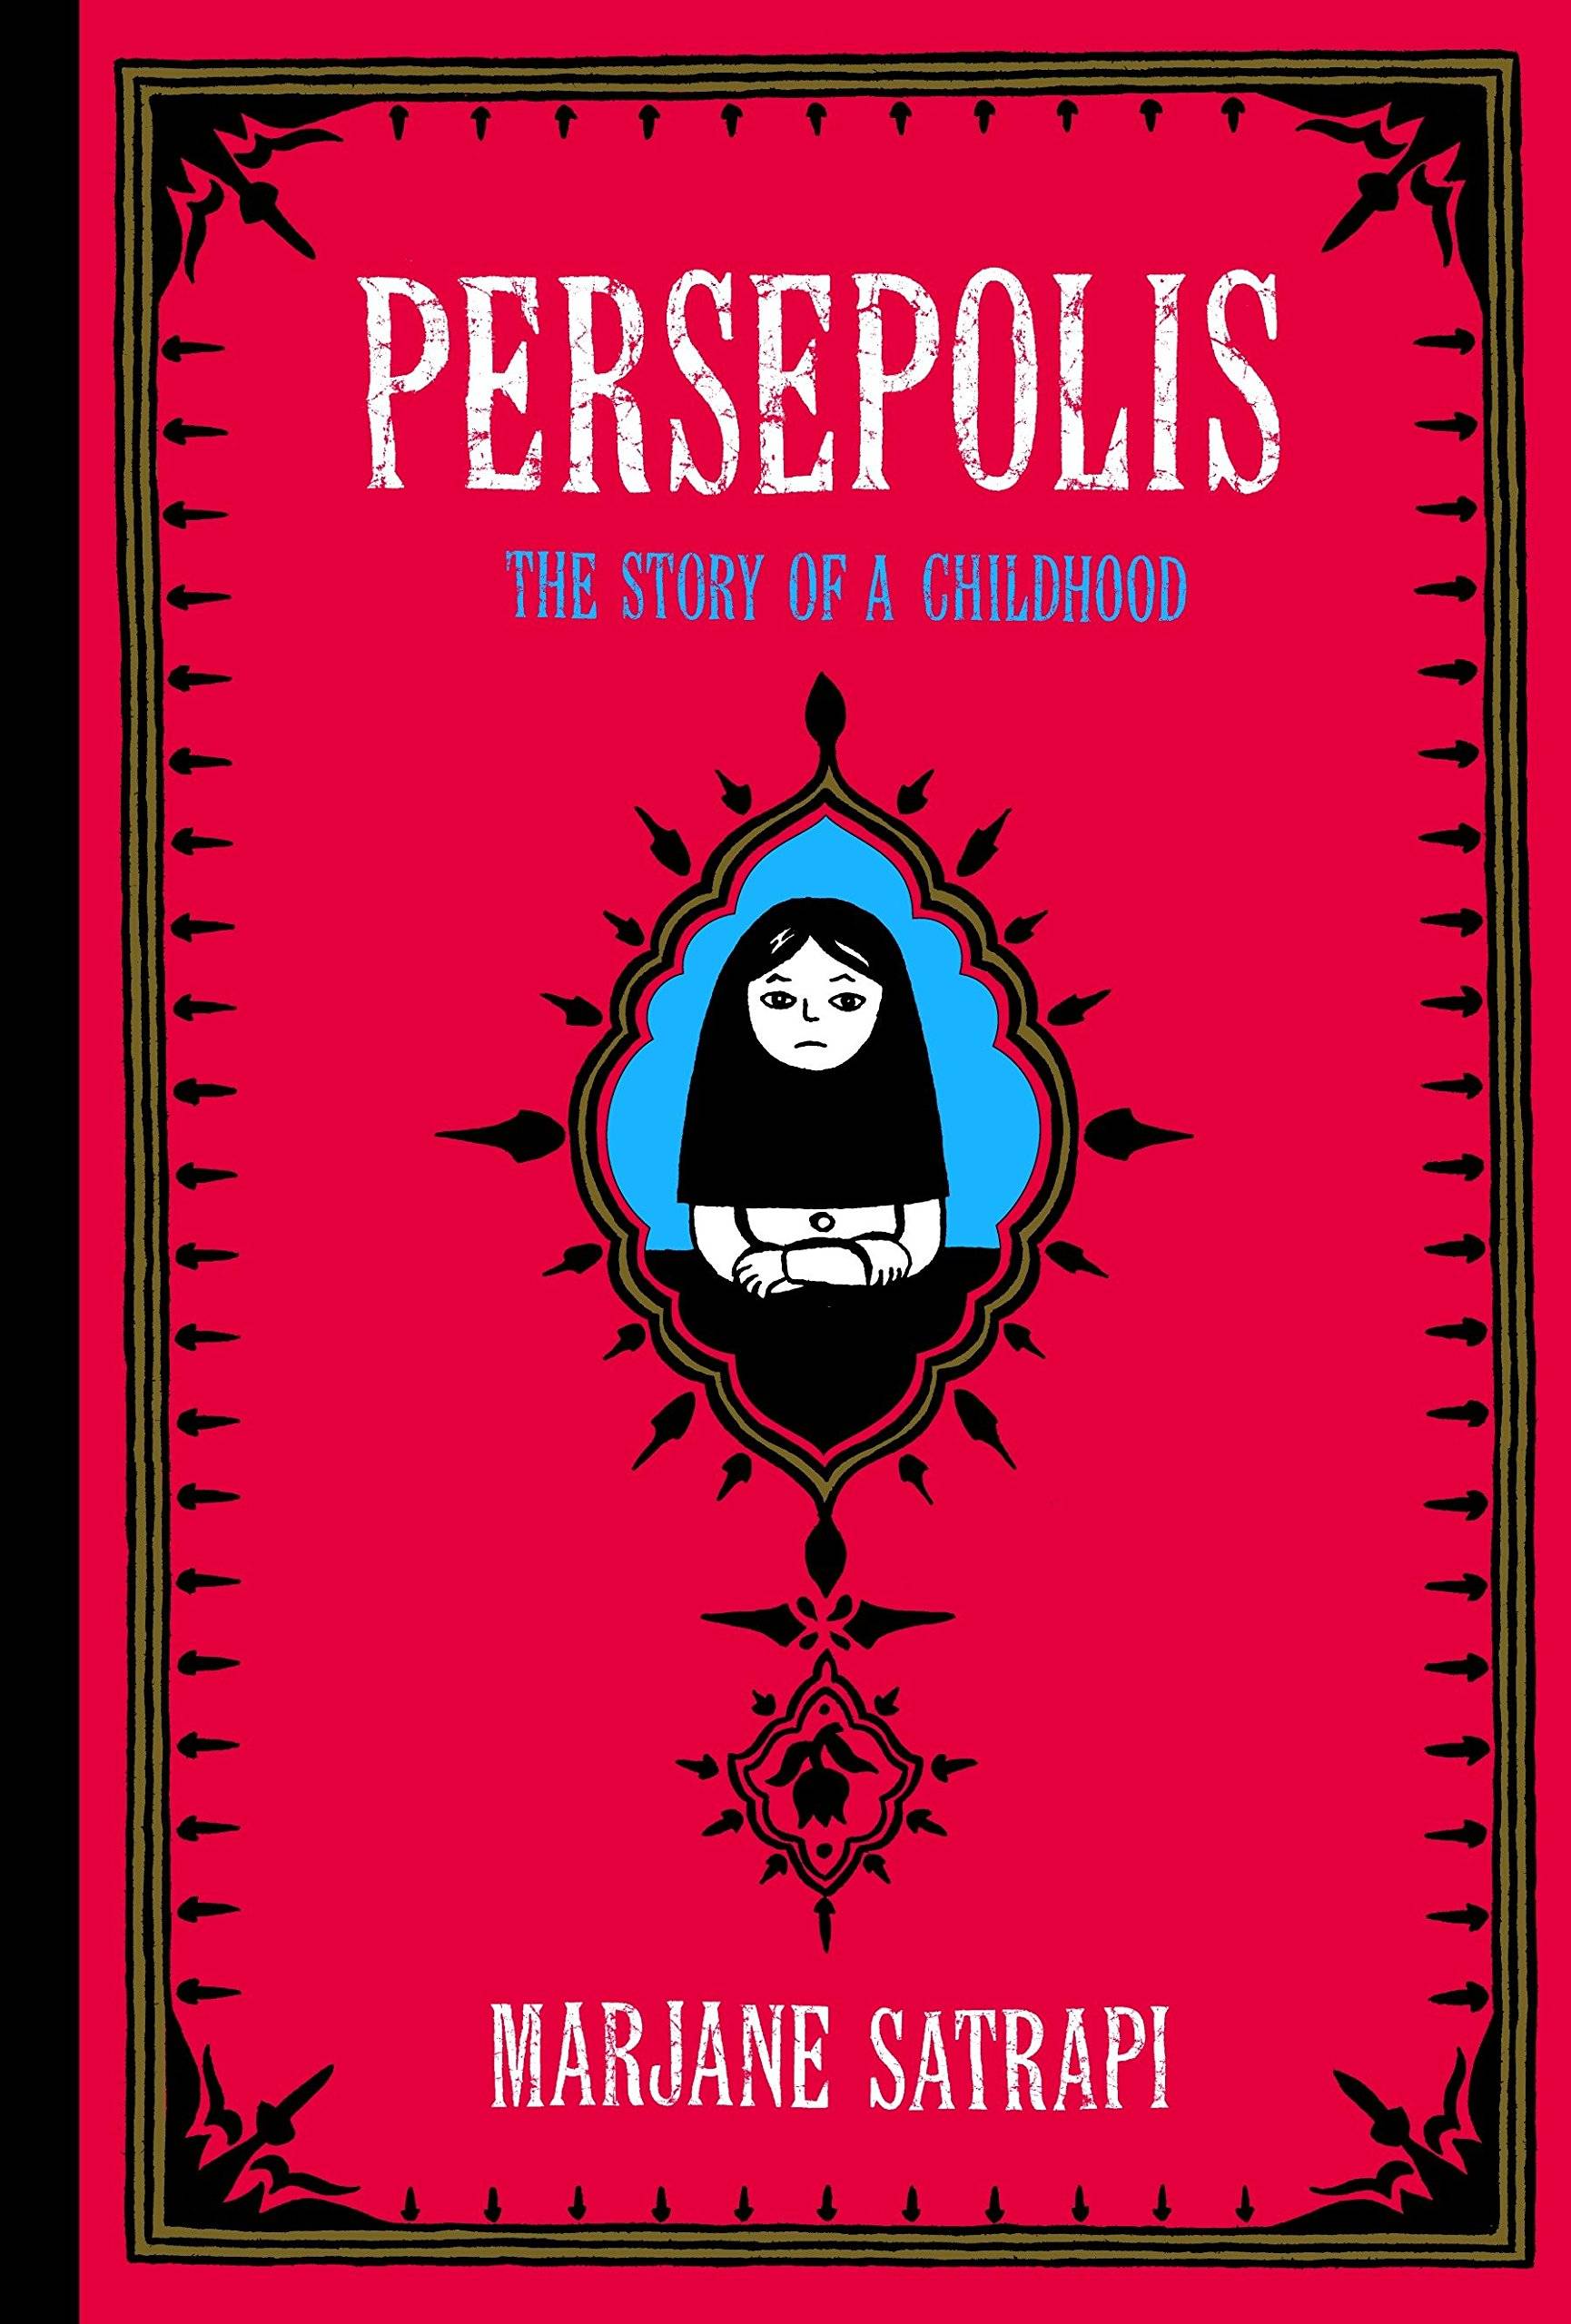 Red book cover with illustrated image of a child in the center